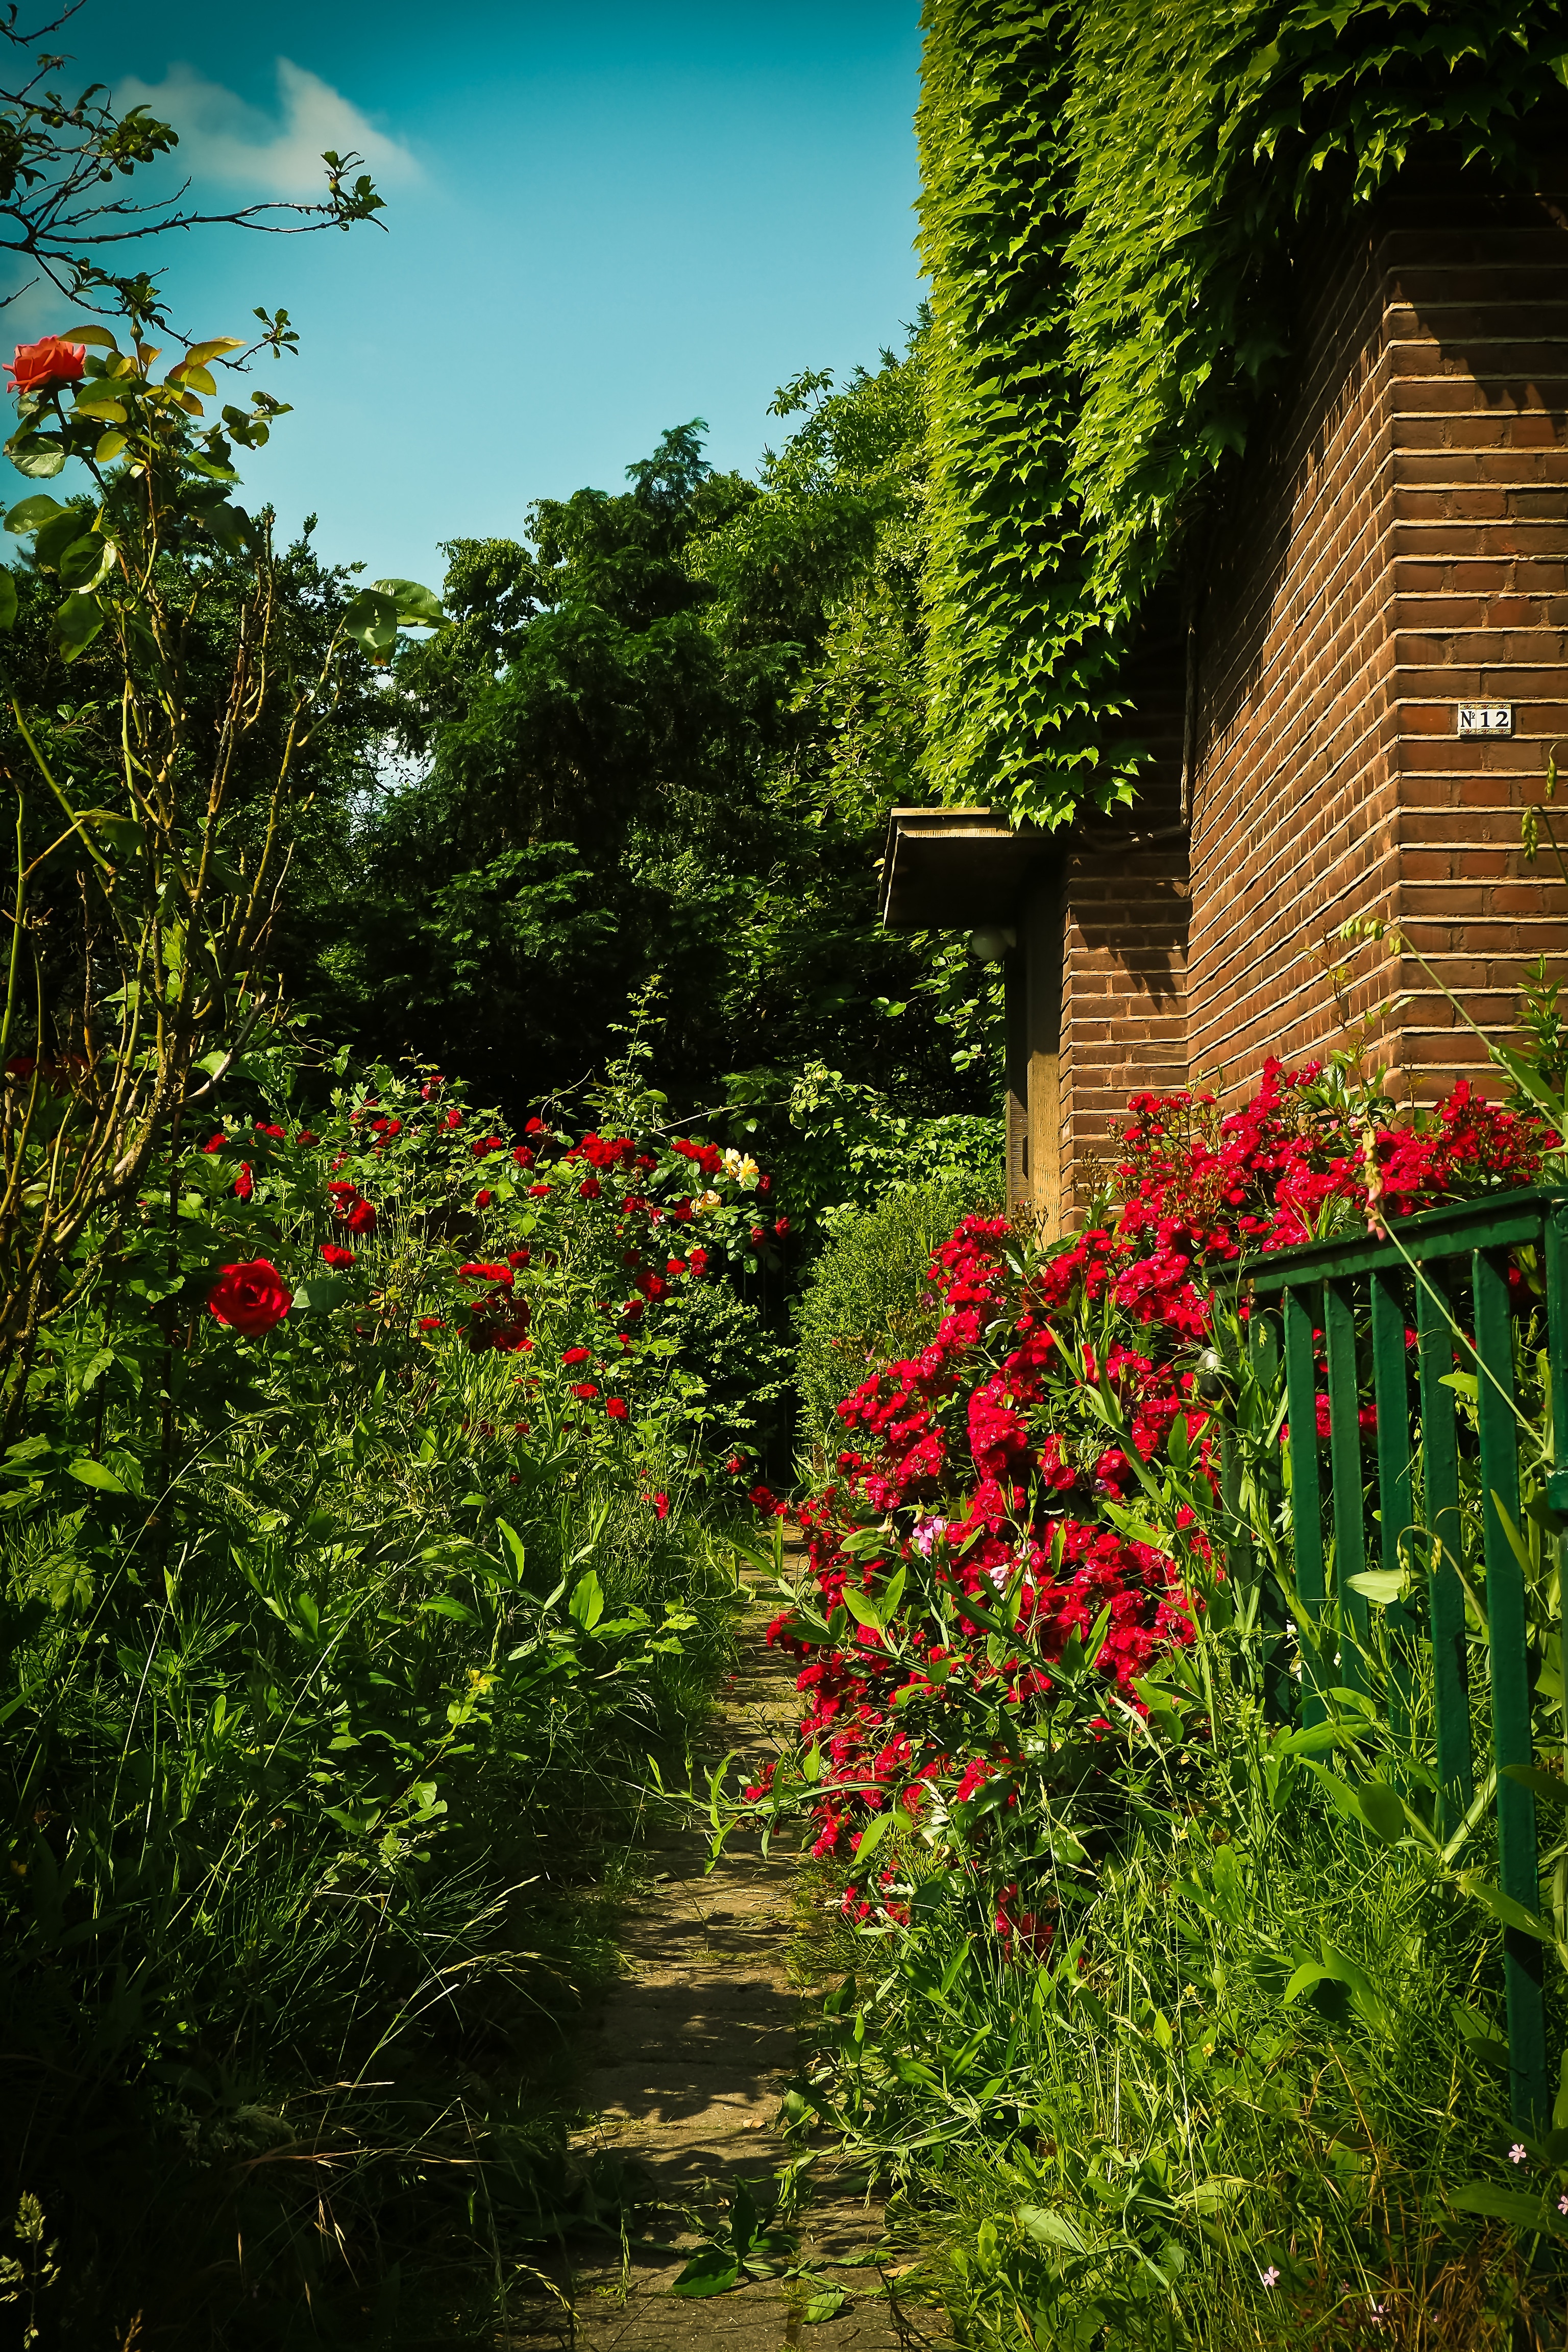 red petaled flower and green leaf pant near bricked house